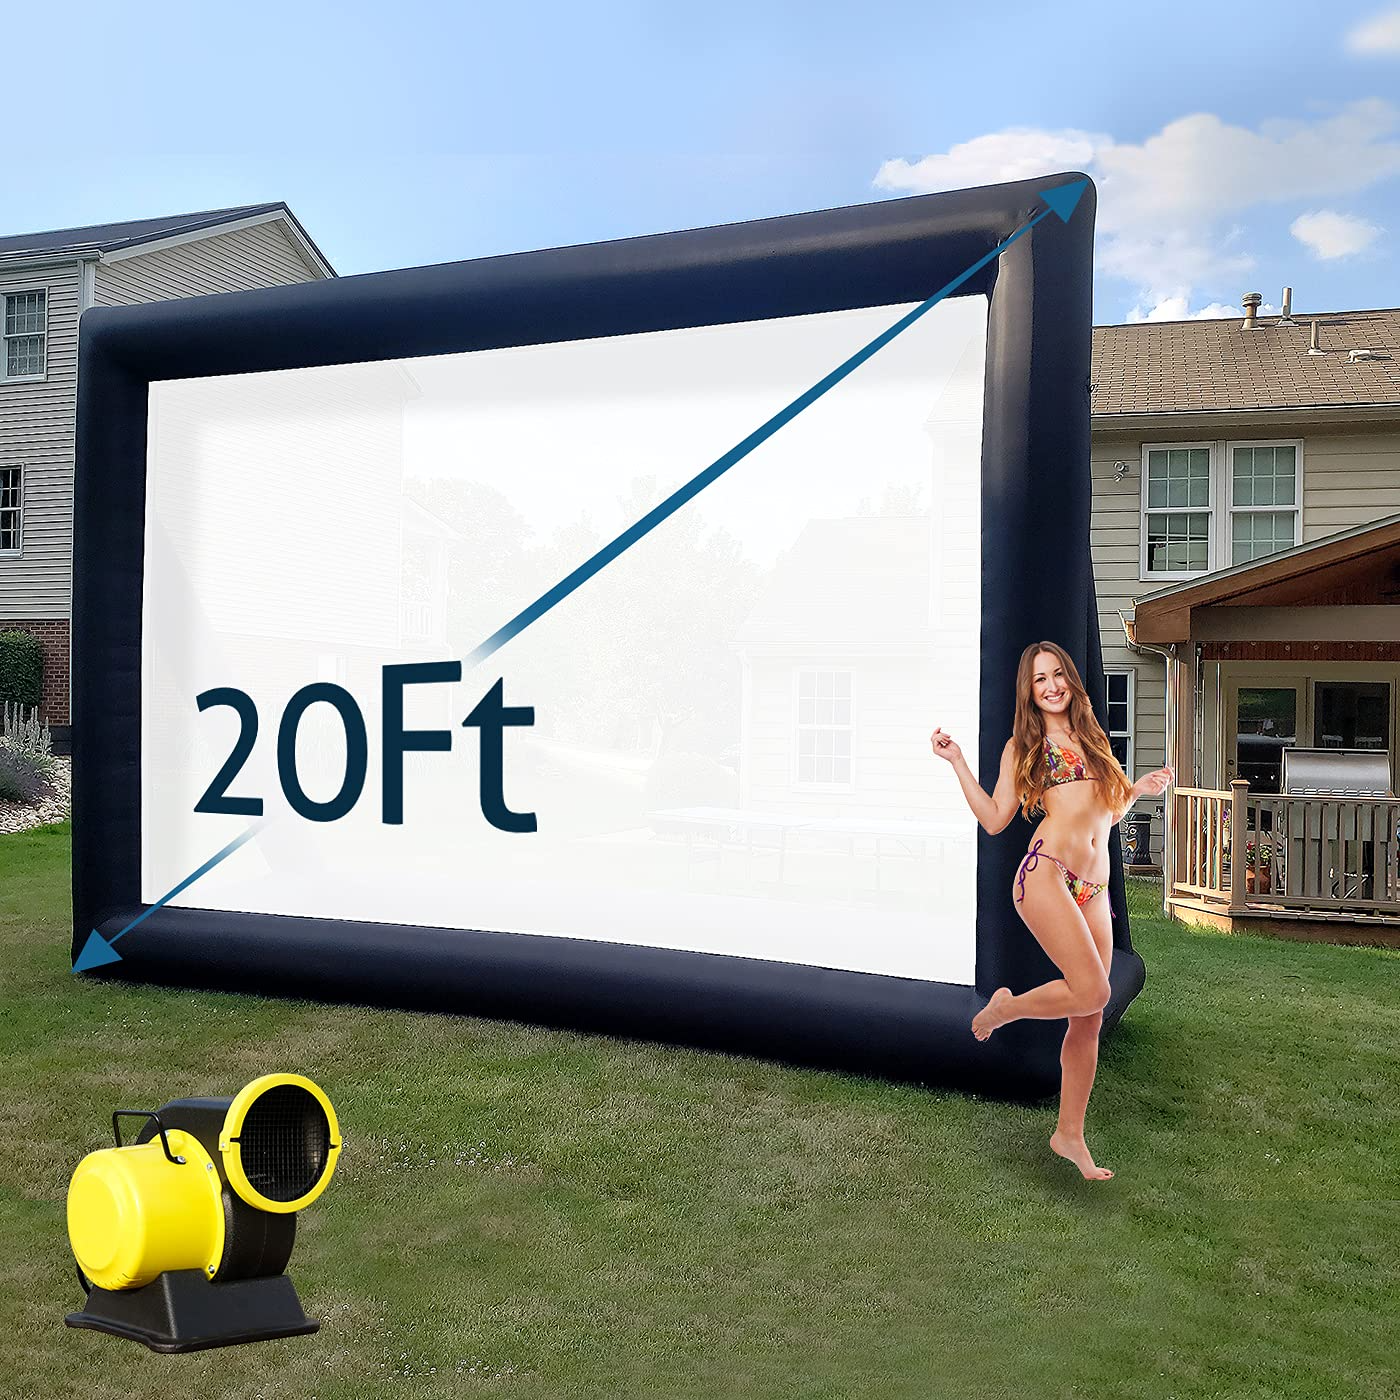 TKLoop Inflatable Movie Screen Indoor and Outdoor, Blow Up Projector Screen - Includes Inflation Fan, Tie-Downs and Storage Bag (20FT)